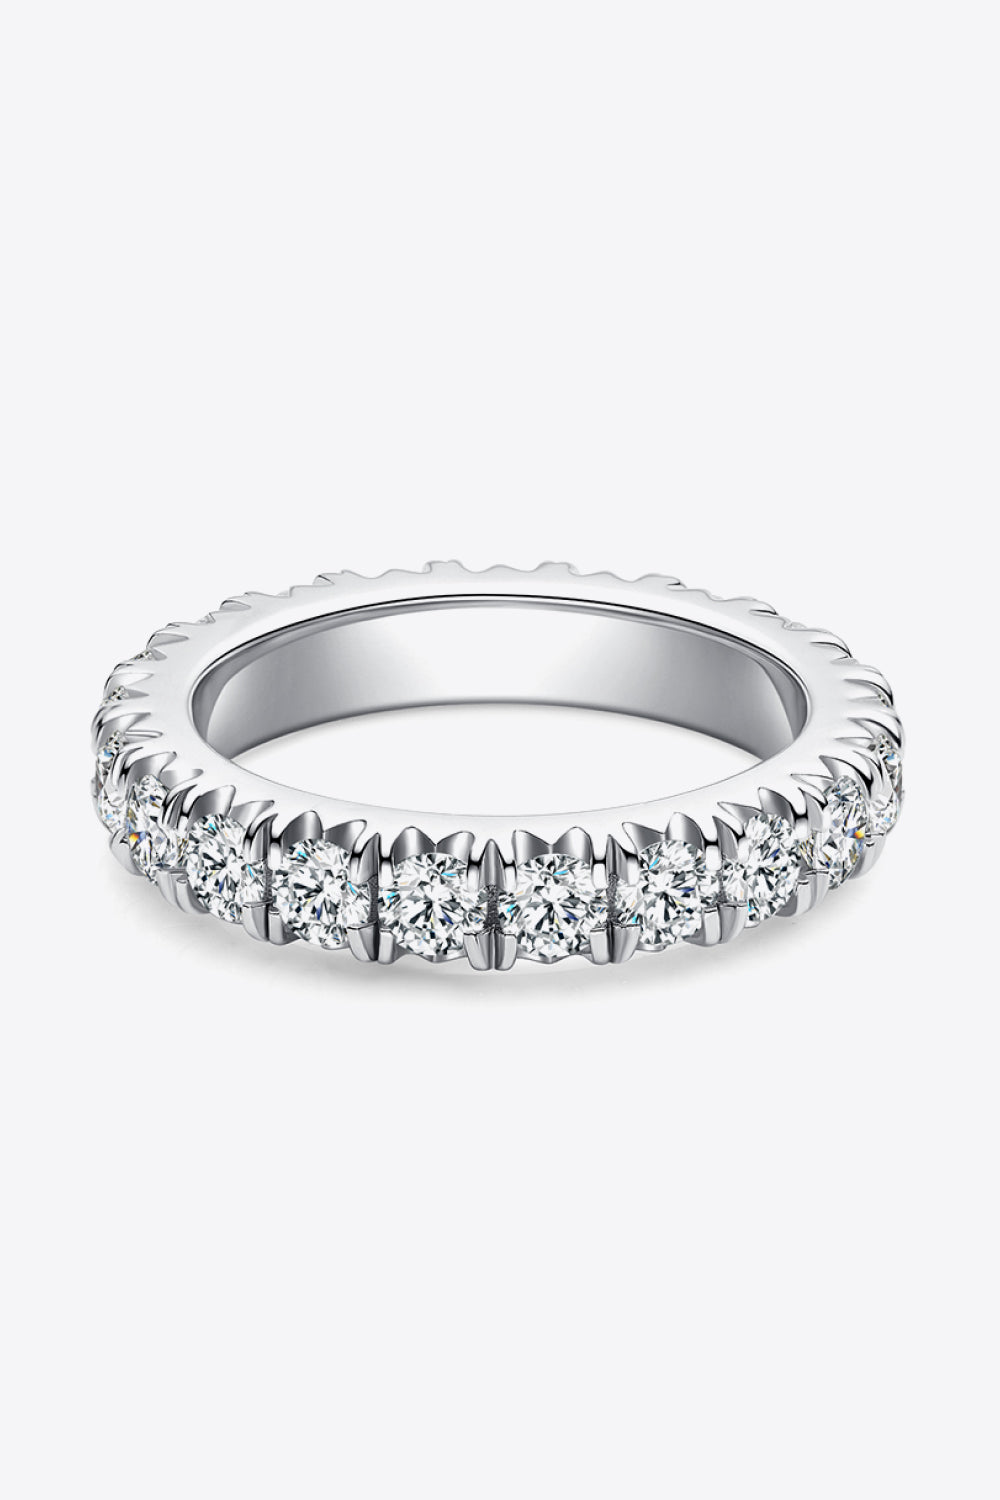 Jewelry 2.3 Carat Moissanite 925 Sterling Silver Eternity Ring